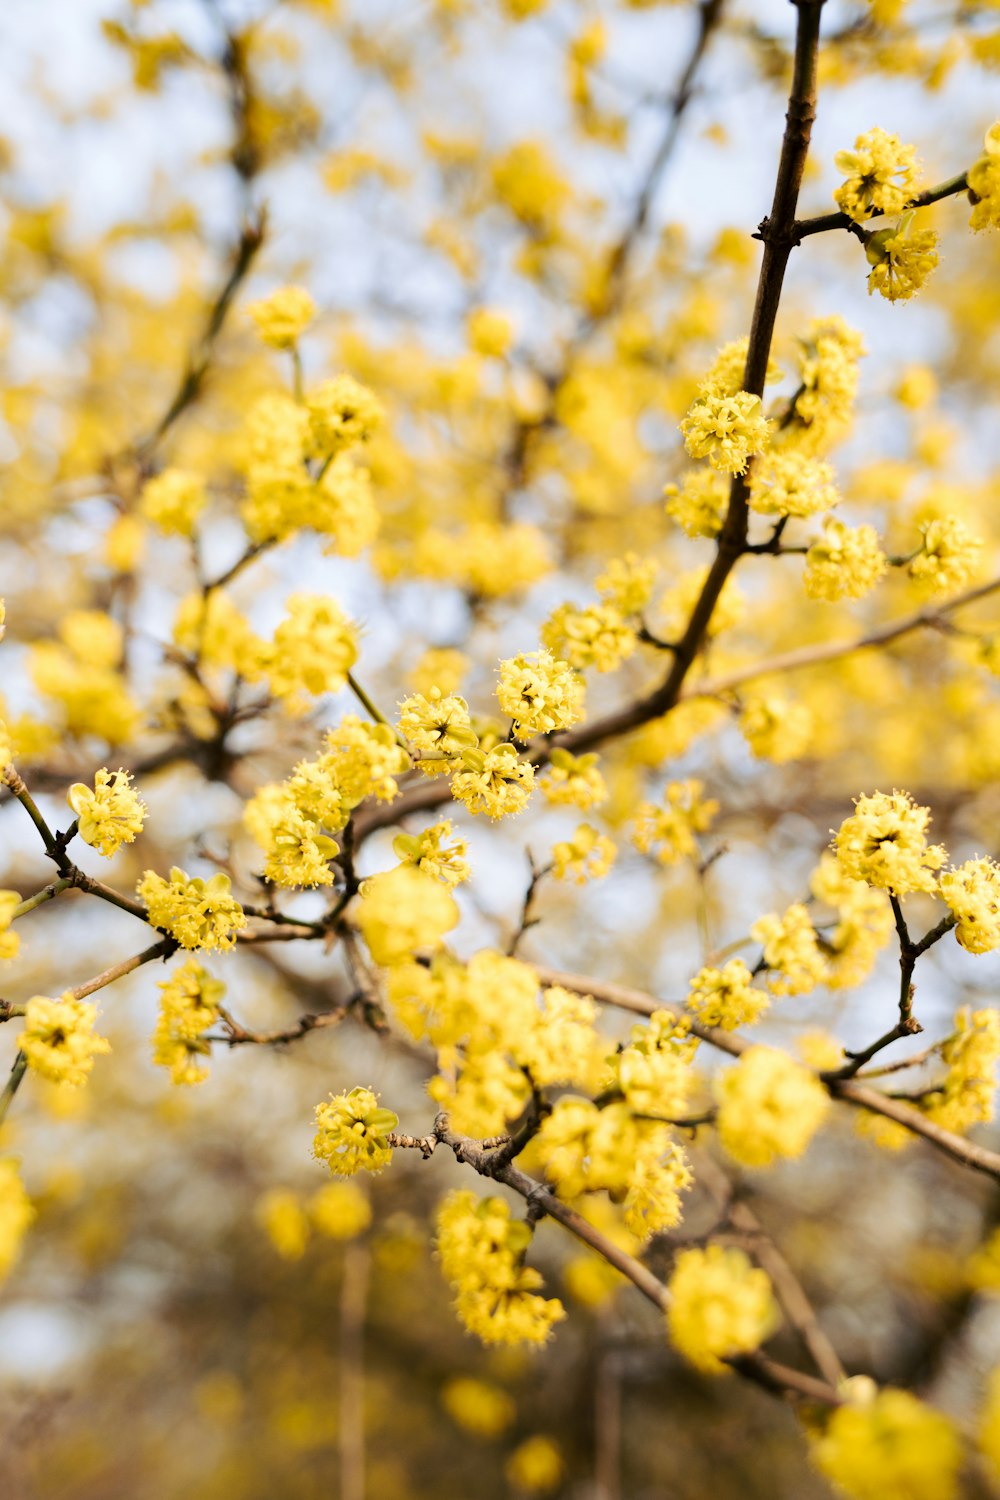 a tree with yellow flowers in the foreground